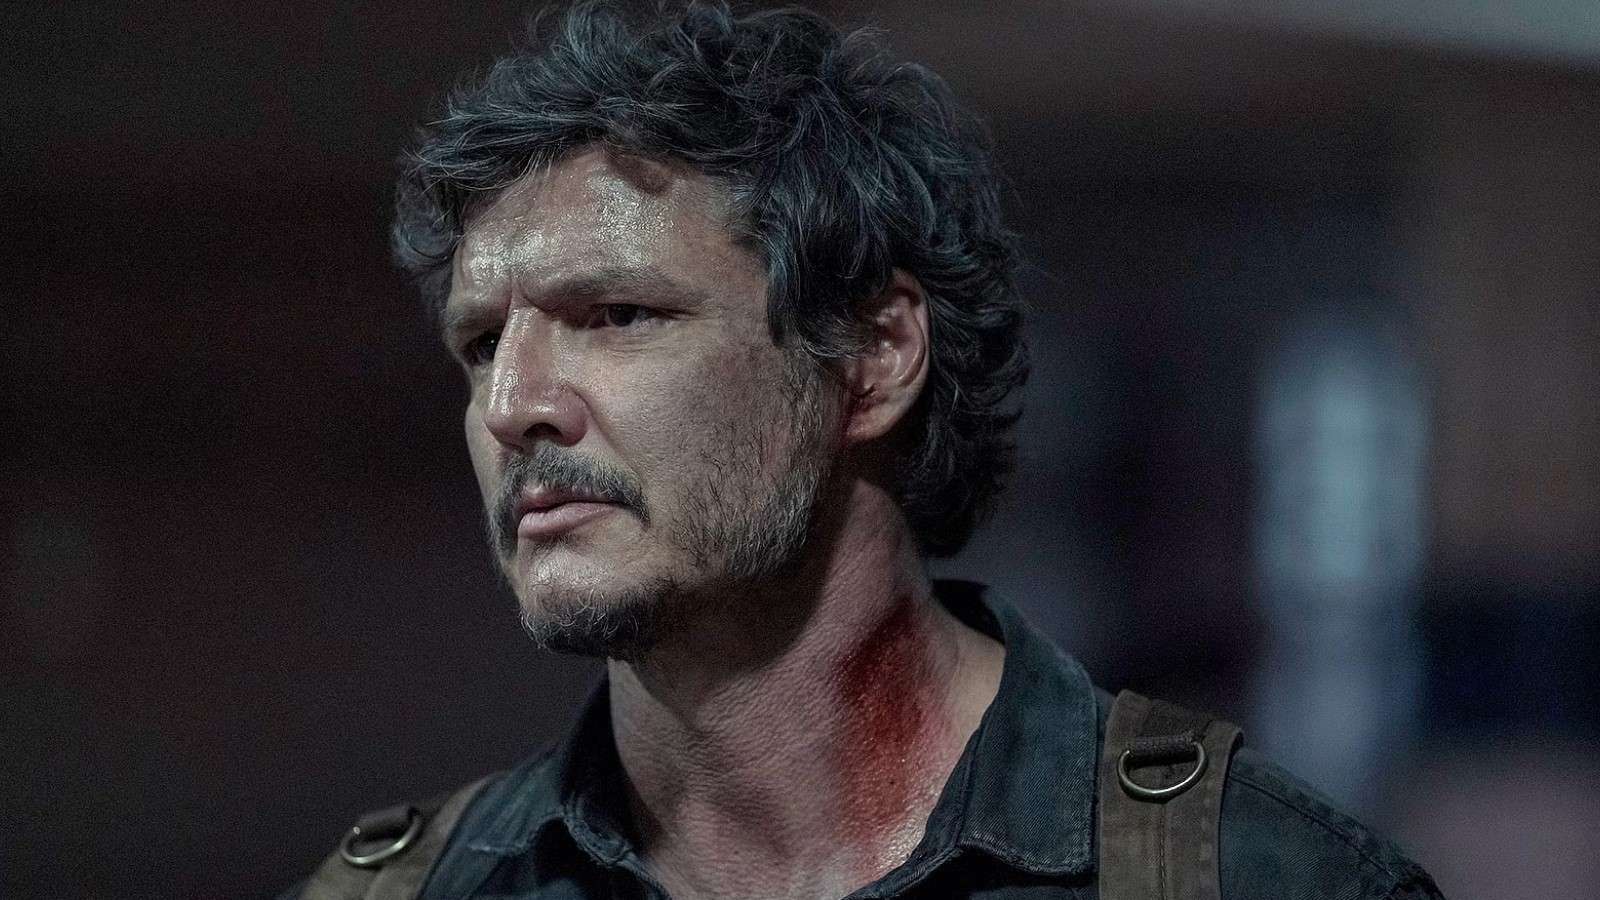 Pedro Pascal as Joel in The Last of Us, standing in a dark room